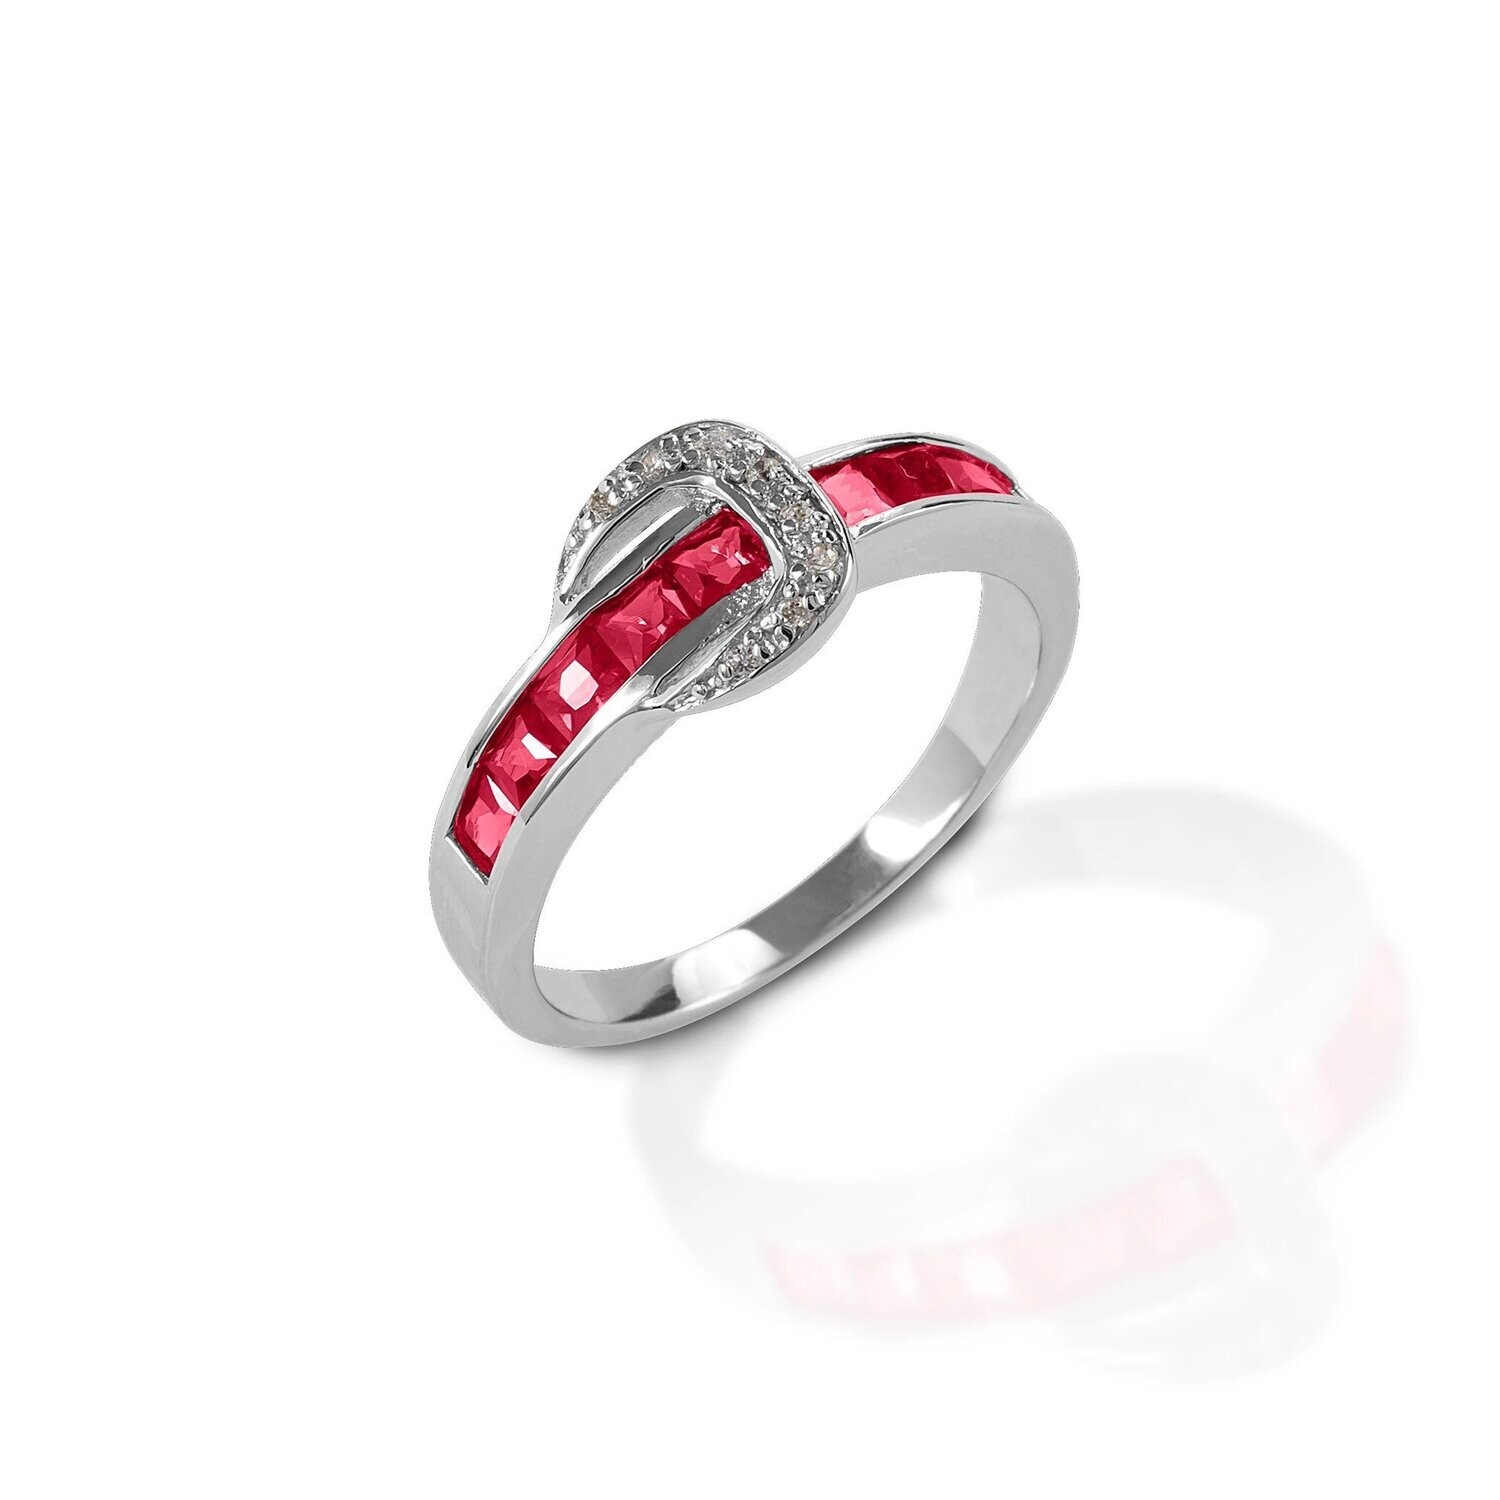 Kelly Herd 4L-7 SM Red Buckle Ring Sterling Silver Size 7